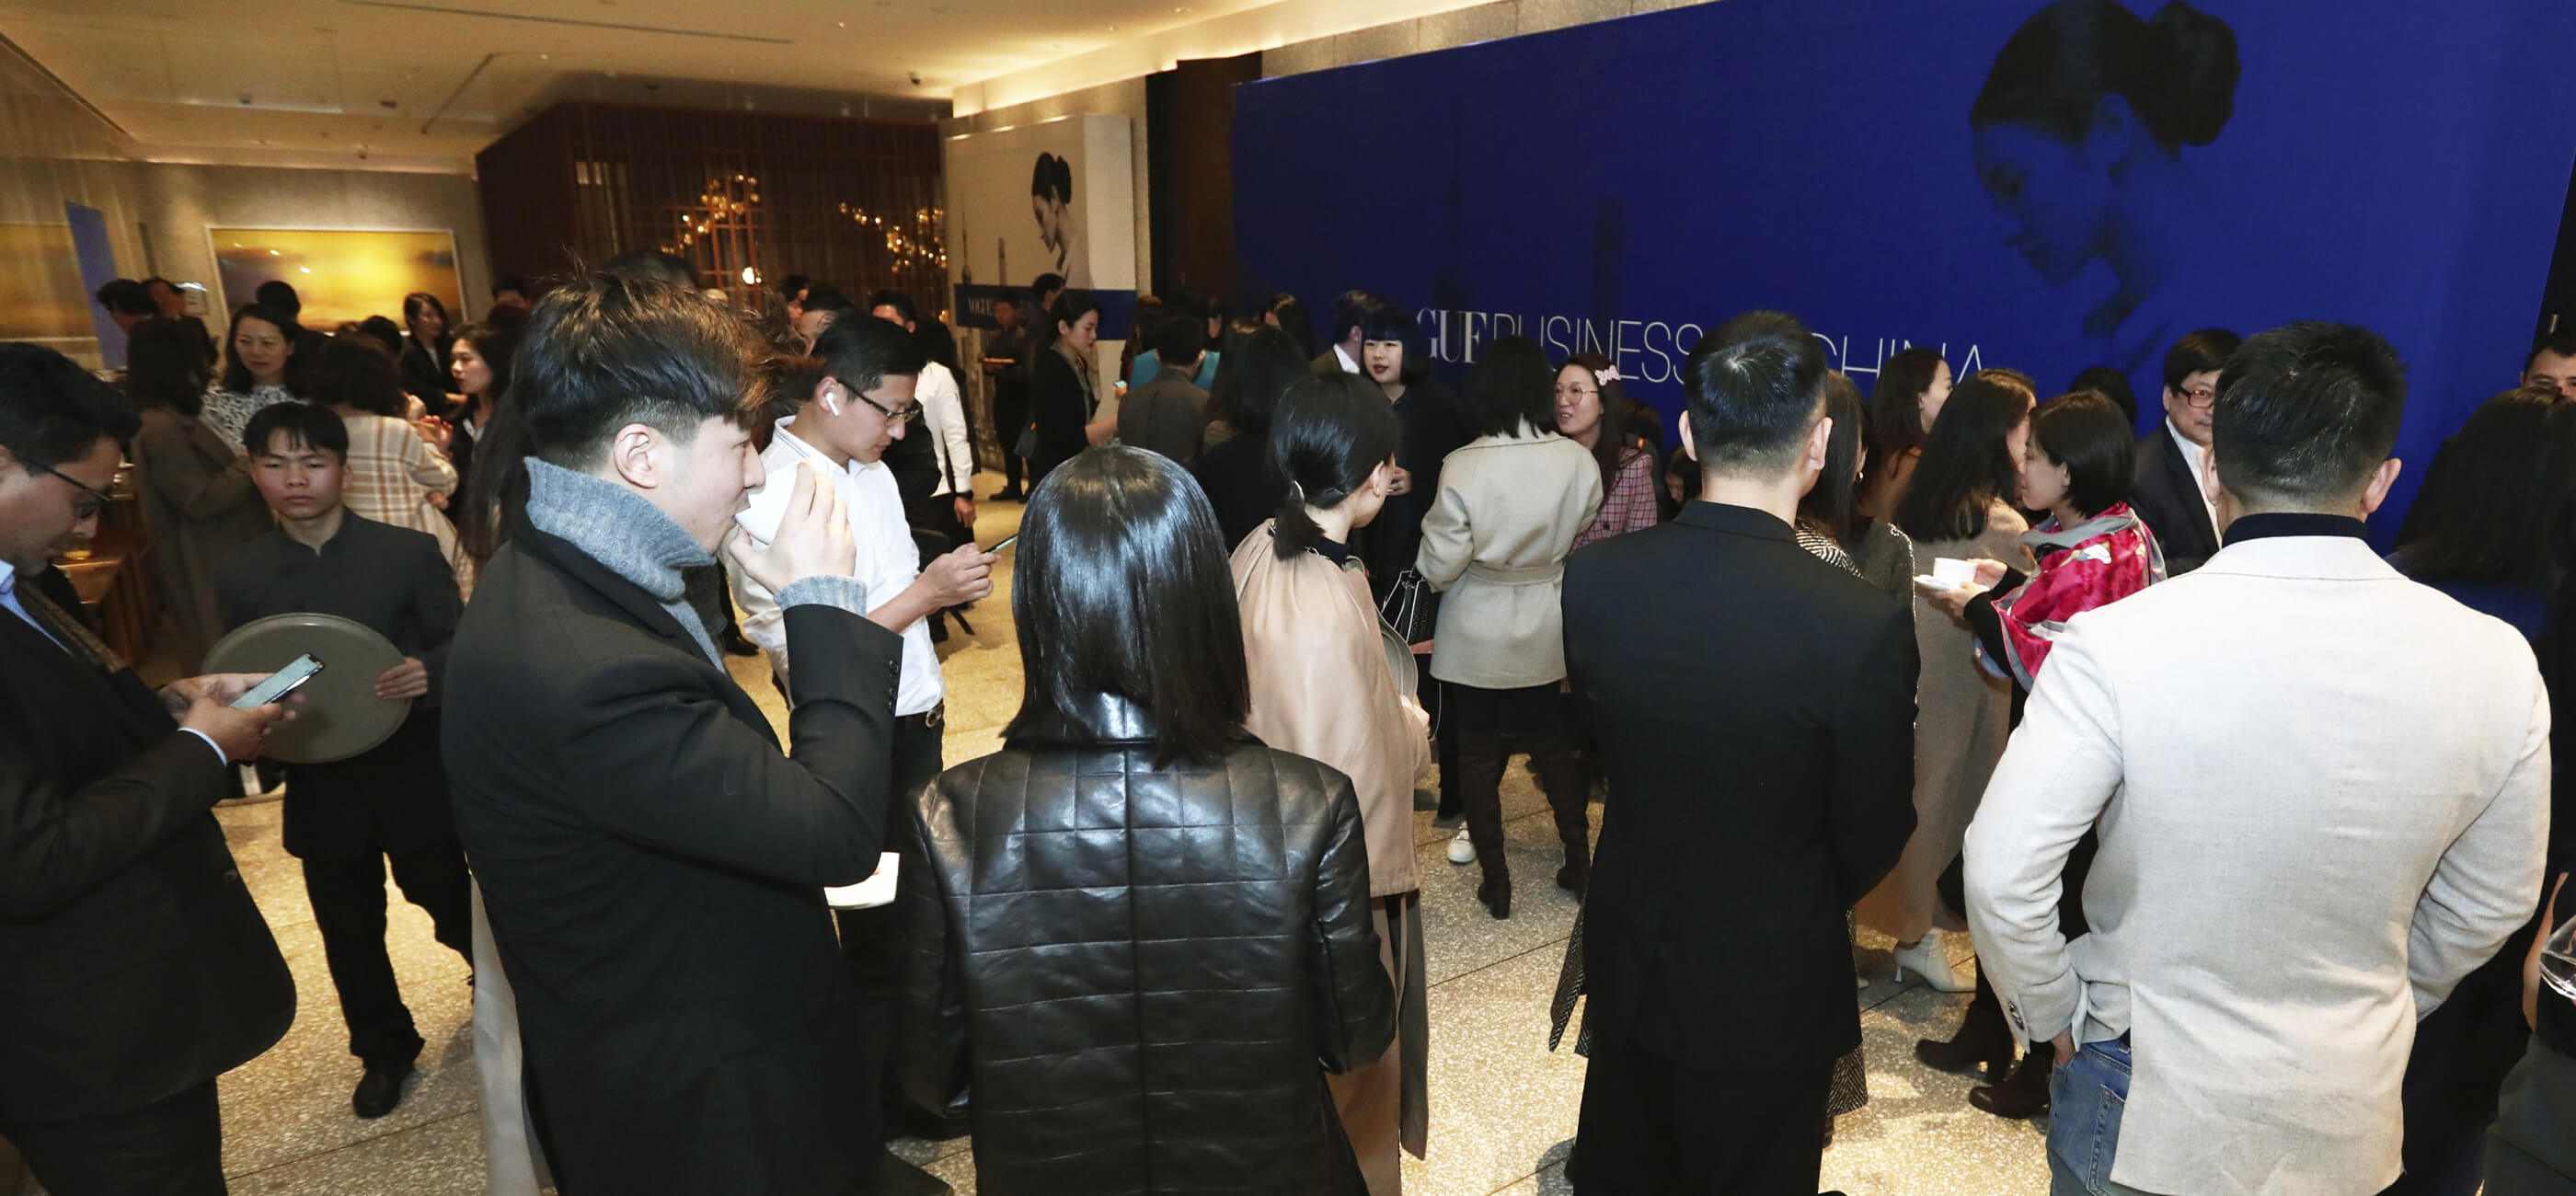 This image may contain: vogue business,  photograph, digital, vogue business in china, people, event, gathering, networking